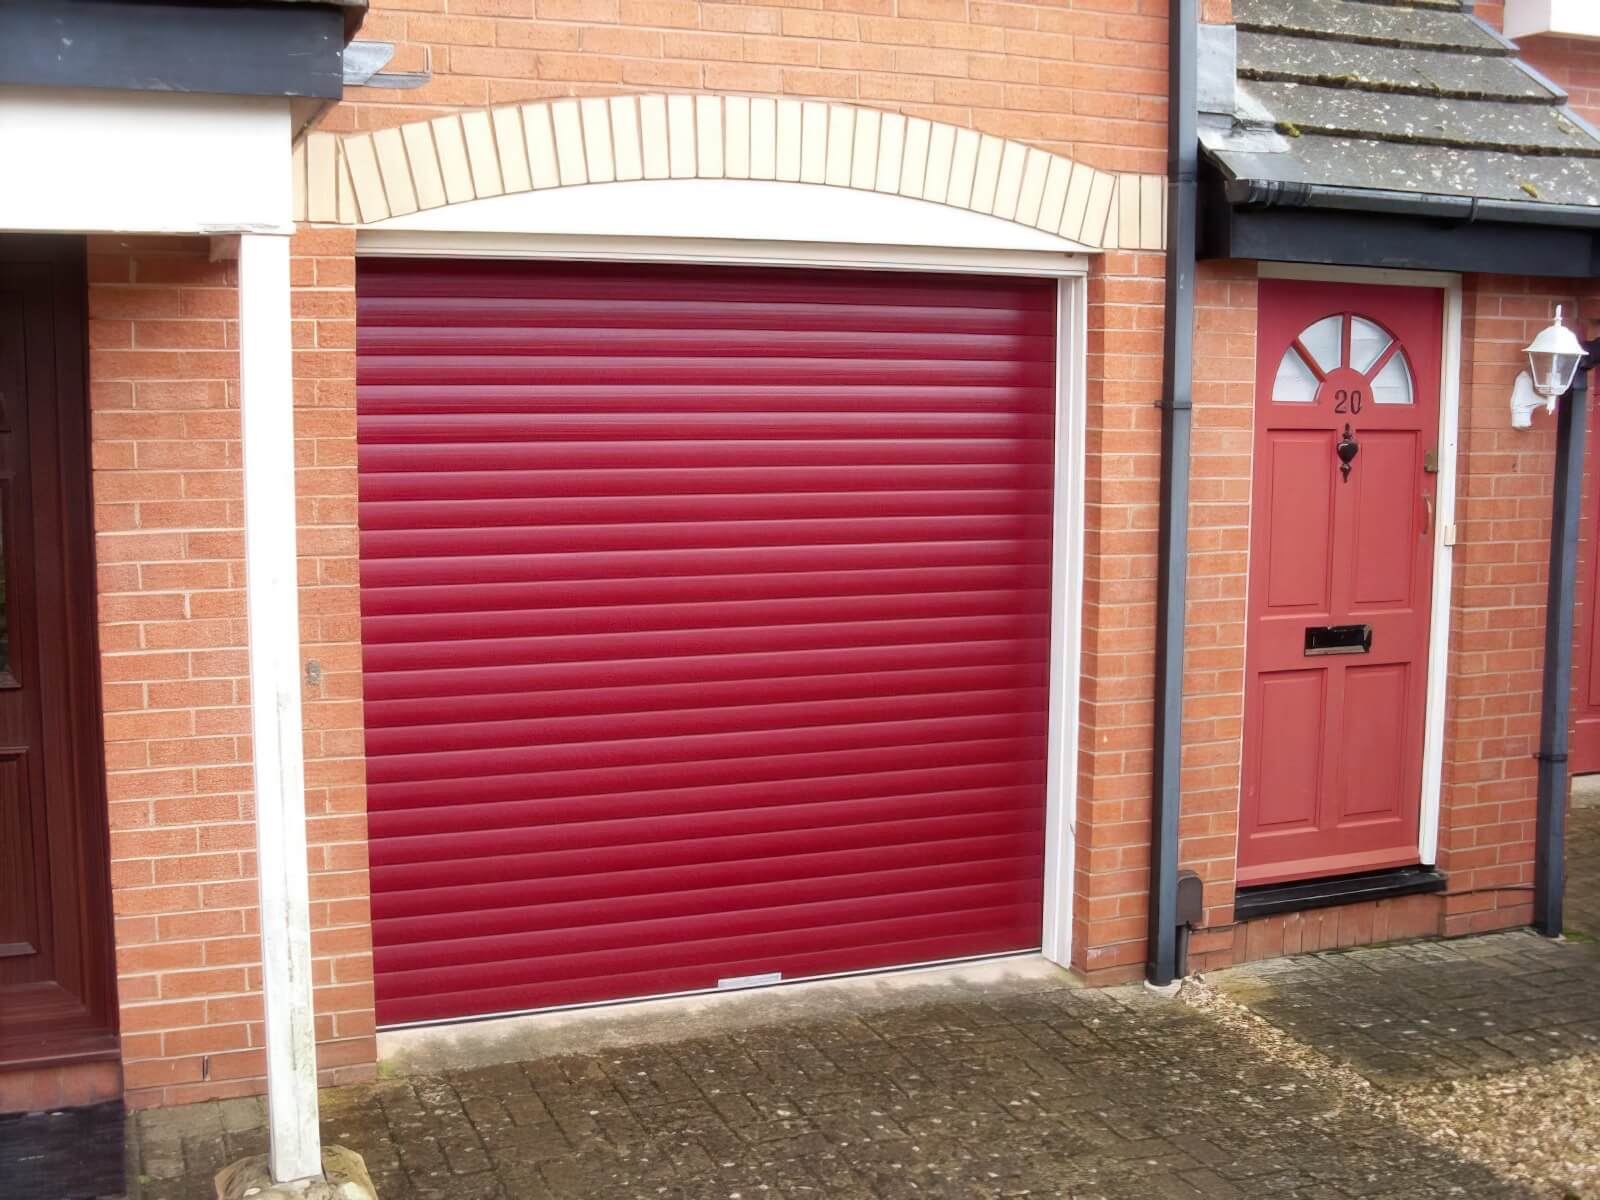 Qualified Sidmouth Roller Garage Doors experts